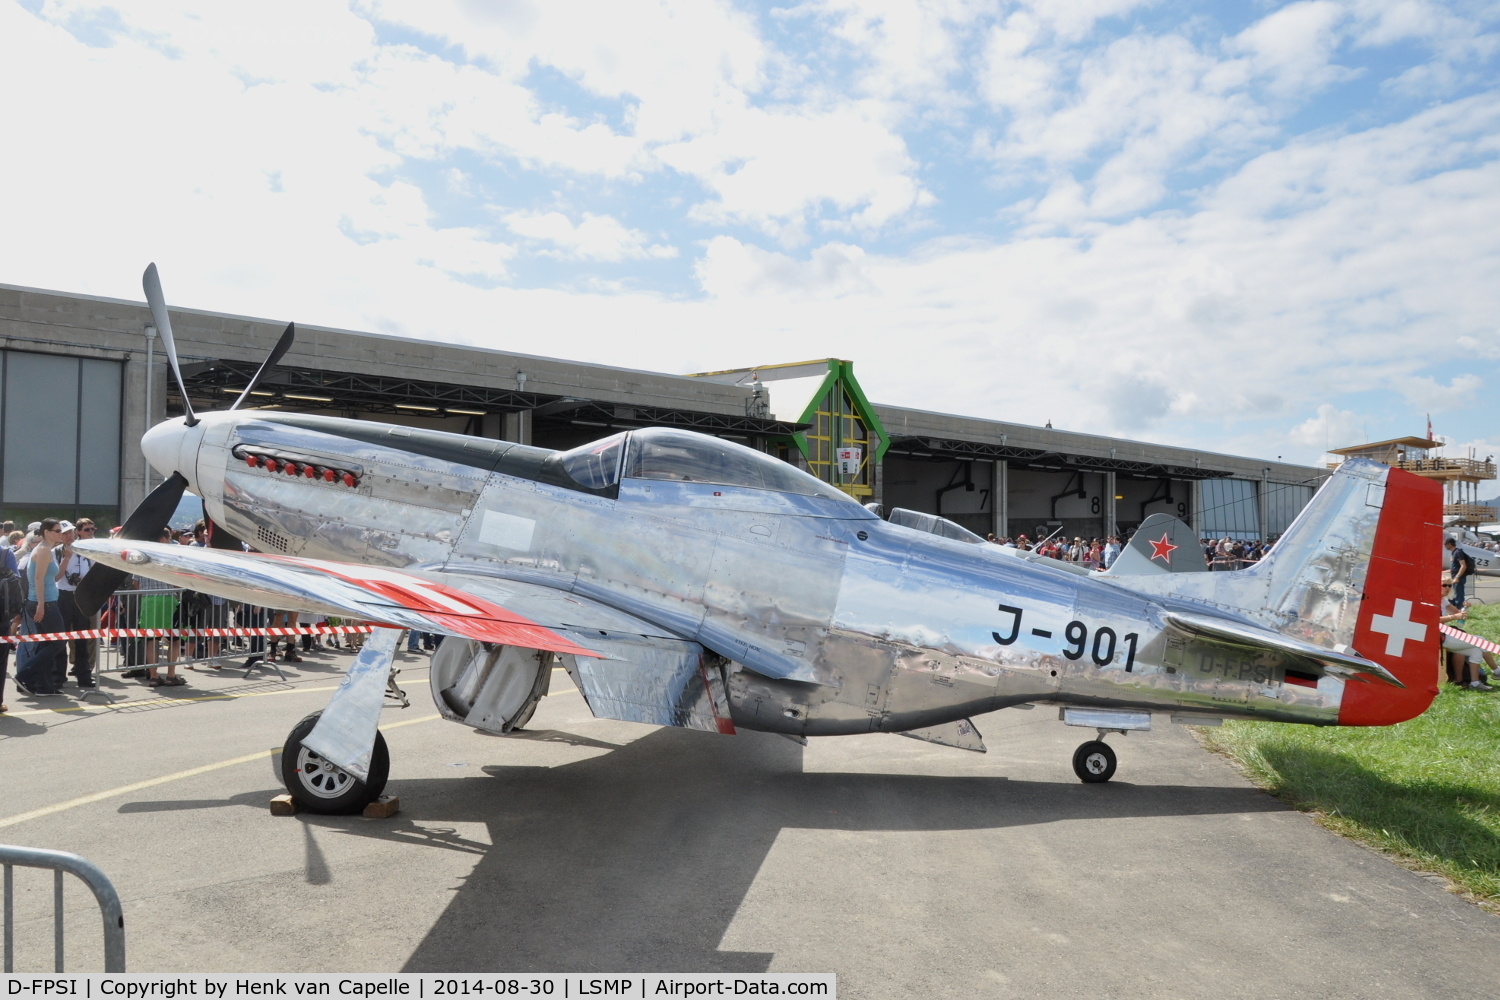 D-FPSI, 1944 North American P-51D Mustang C/N 122-39232, German Mustang temporarily painted as Swiss Air Force J-901 for the celebration of 100 years Swiss Air Force, the AIR14 airshow, at Payerne Air Base.